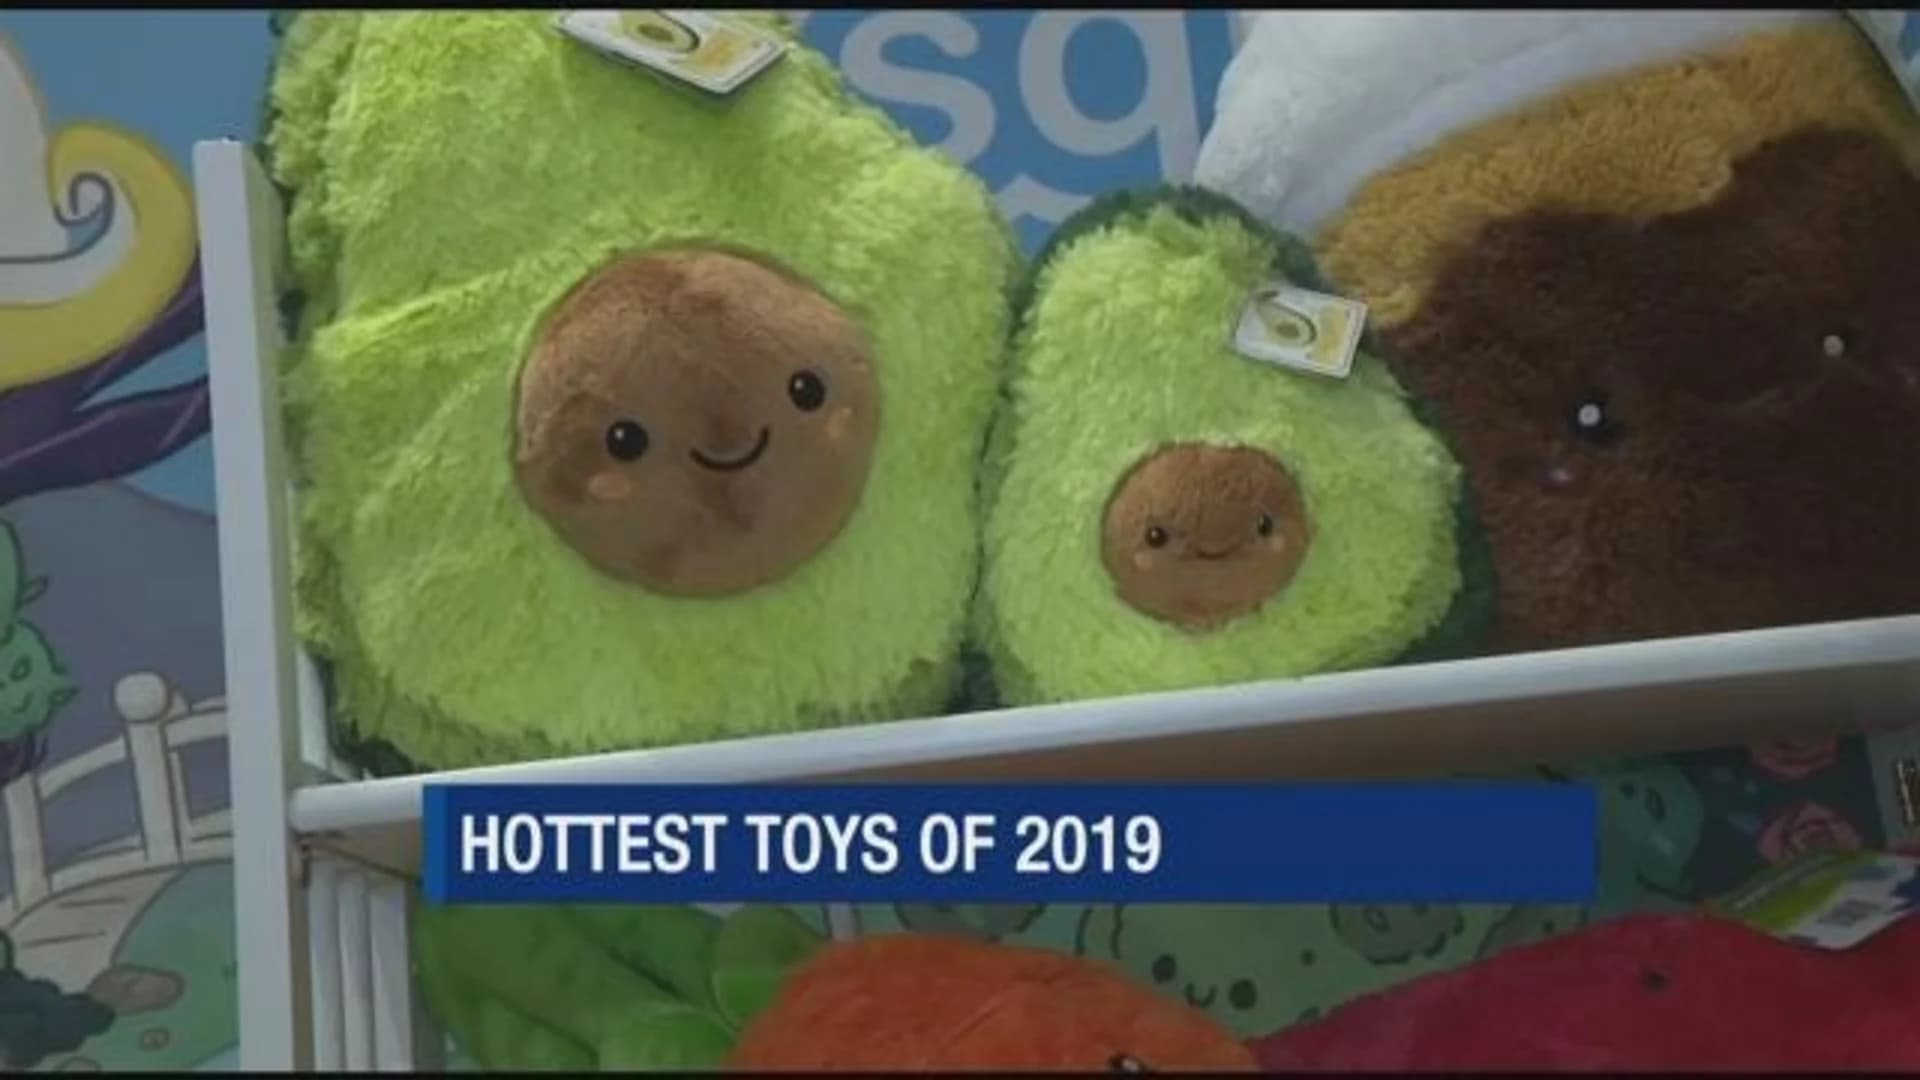 At toy fair, manufacturers showcase 2019 releases